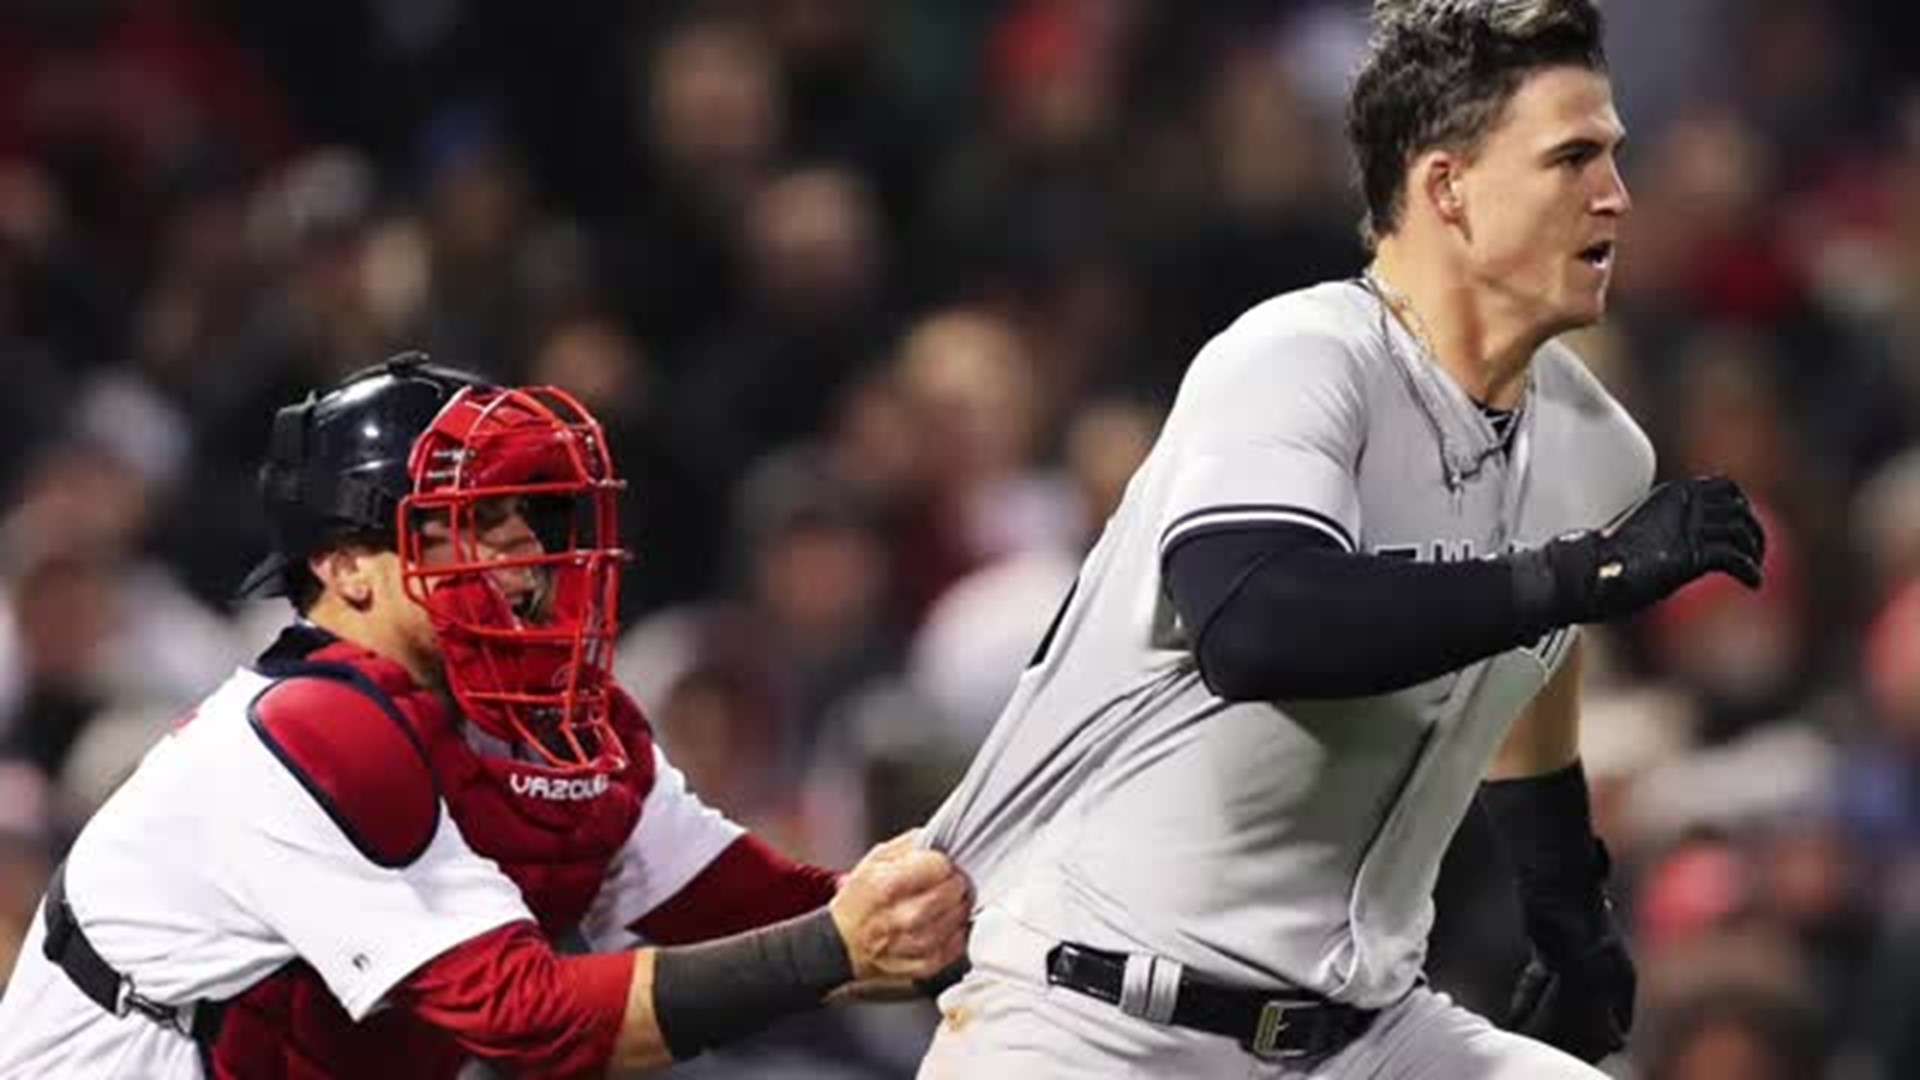 Yankees, Red Sox fight at Fenway after New York player hit; Yankees